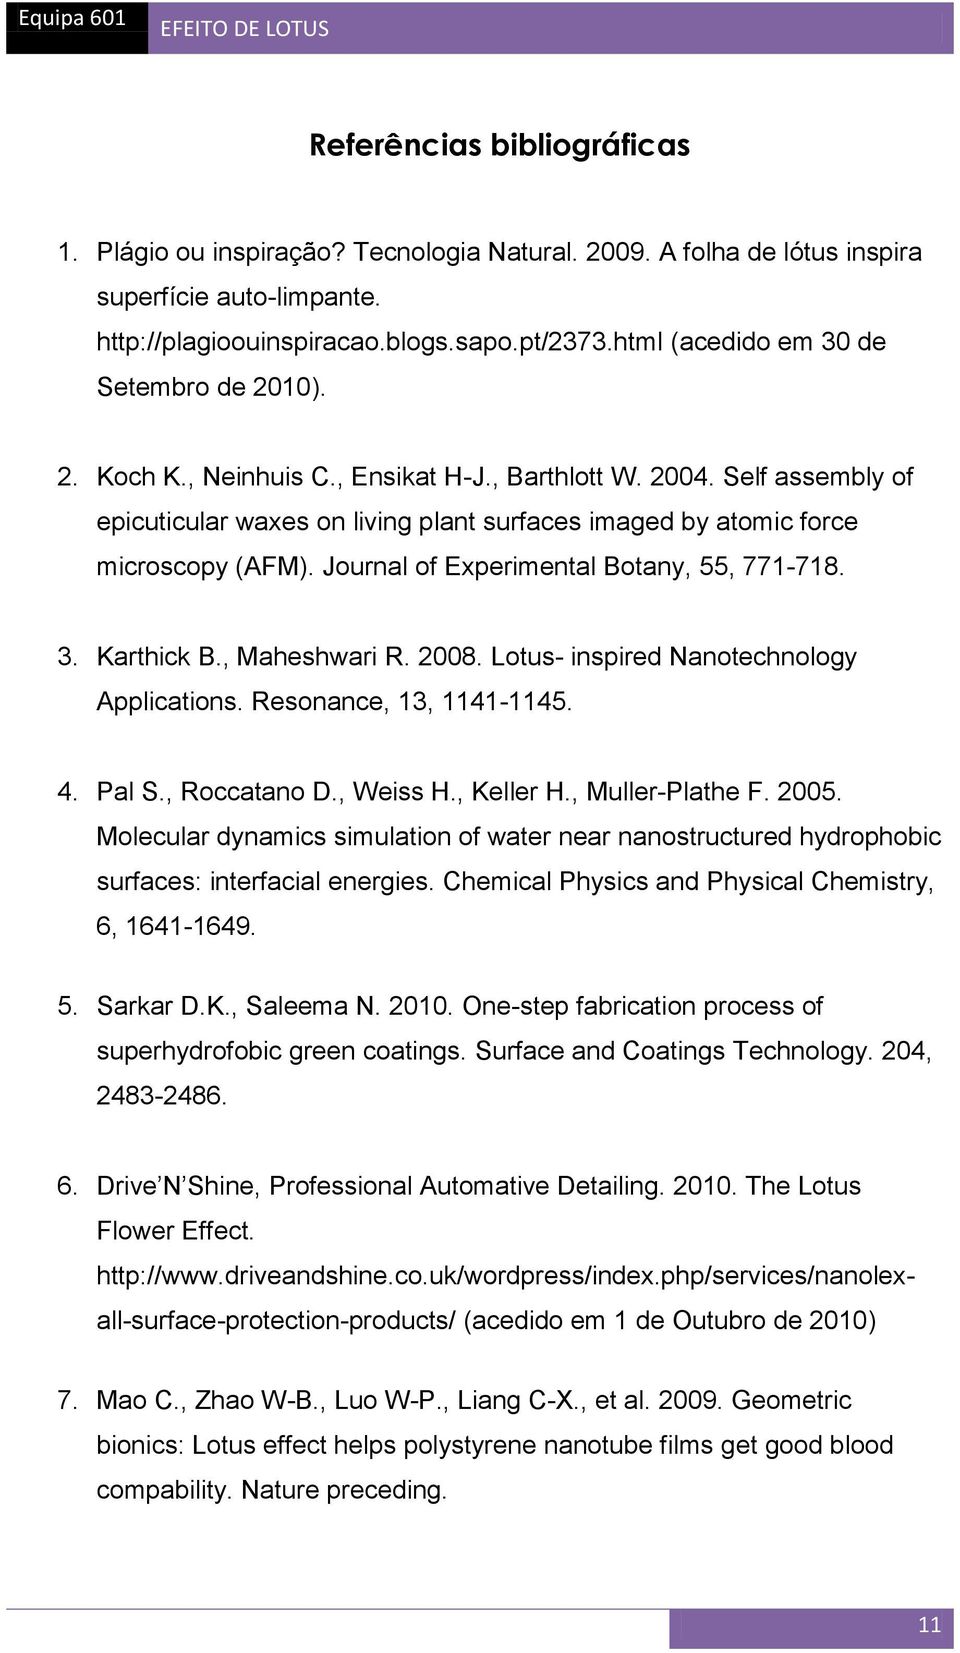 Self assembly of epicuticular waxes on living plant surfaces imaged by atomic force microscopy (AFM). Journal of Experimental Botany, 55, 771-718. 3. Karthick B., Maheshwari R. 2008.